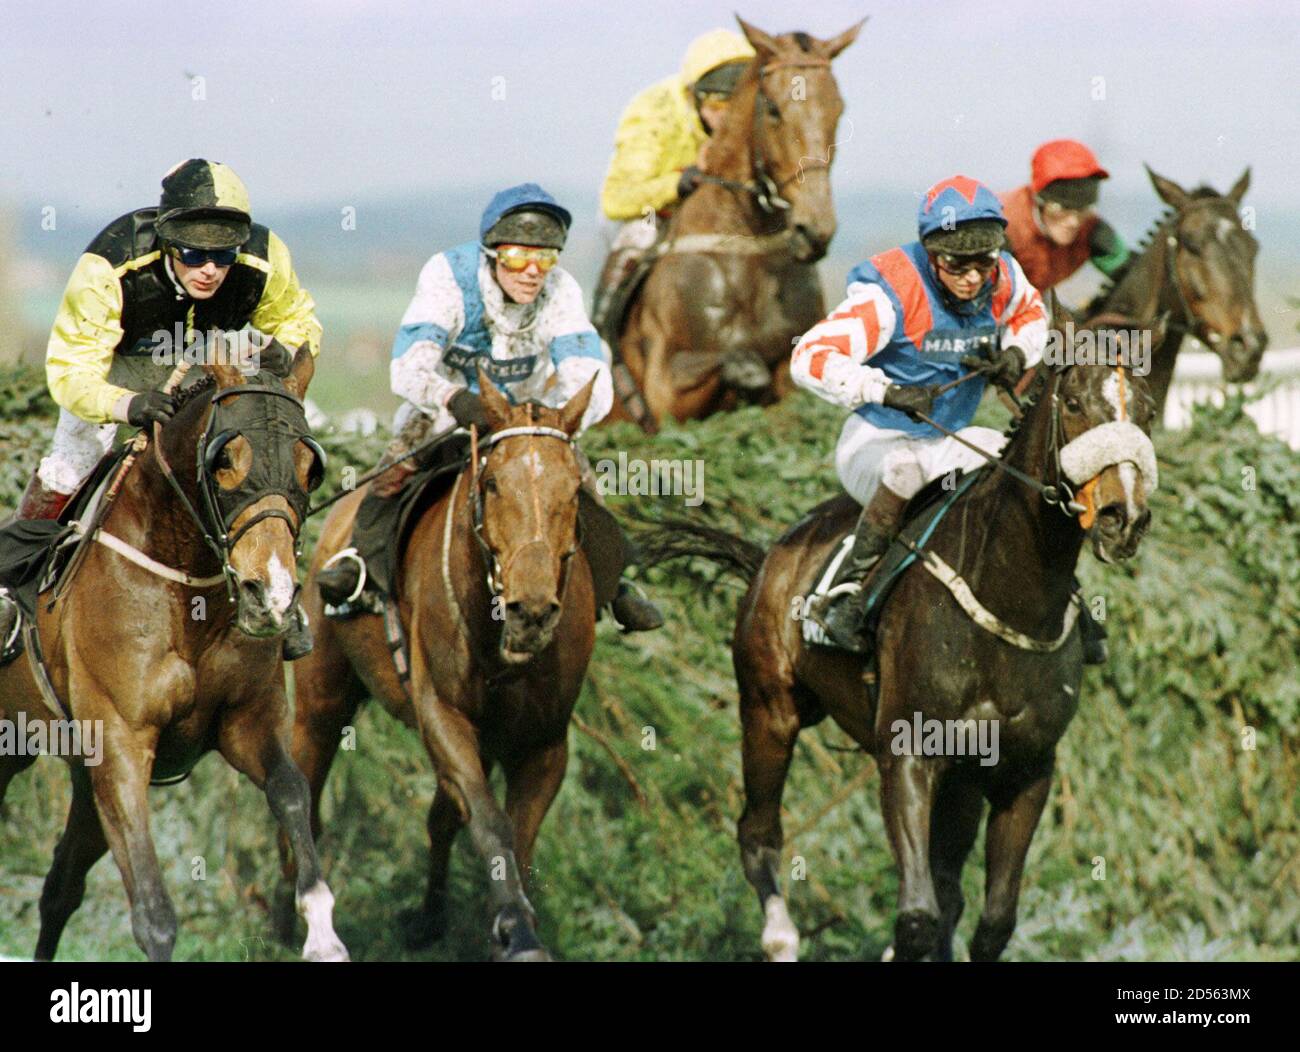 Jockey Carl Llewellyn Rides The Grand National Winner Earth Summit L Away From The Chair Hurdle With Brave Highlander C And Go Universal R Keeping Up The Pace April 4 The Race